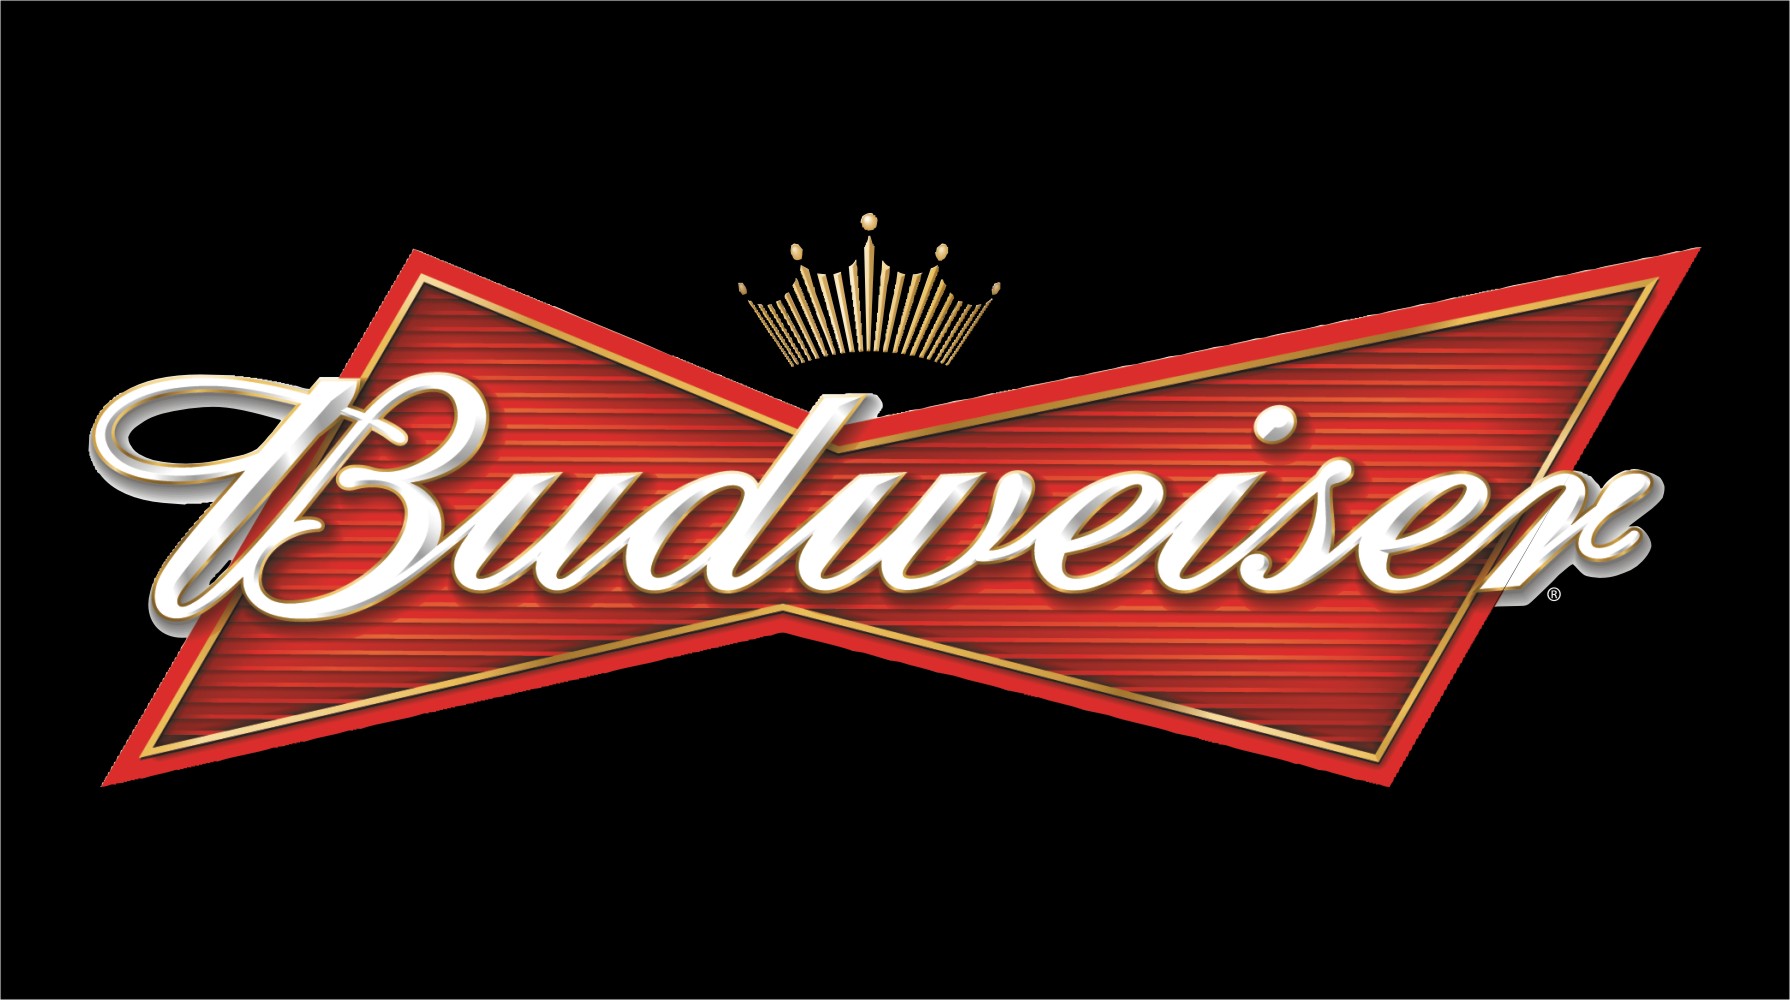 Large Ethics Amp Social Responsibility Budweiser The Beer HD Wallpaper